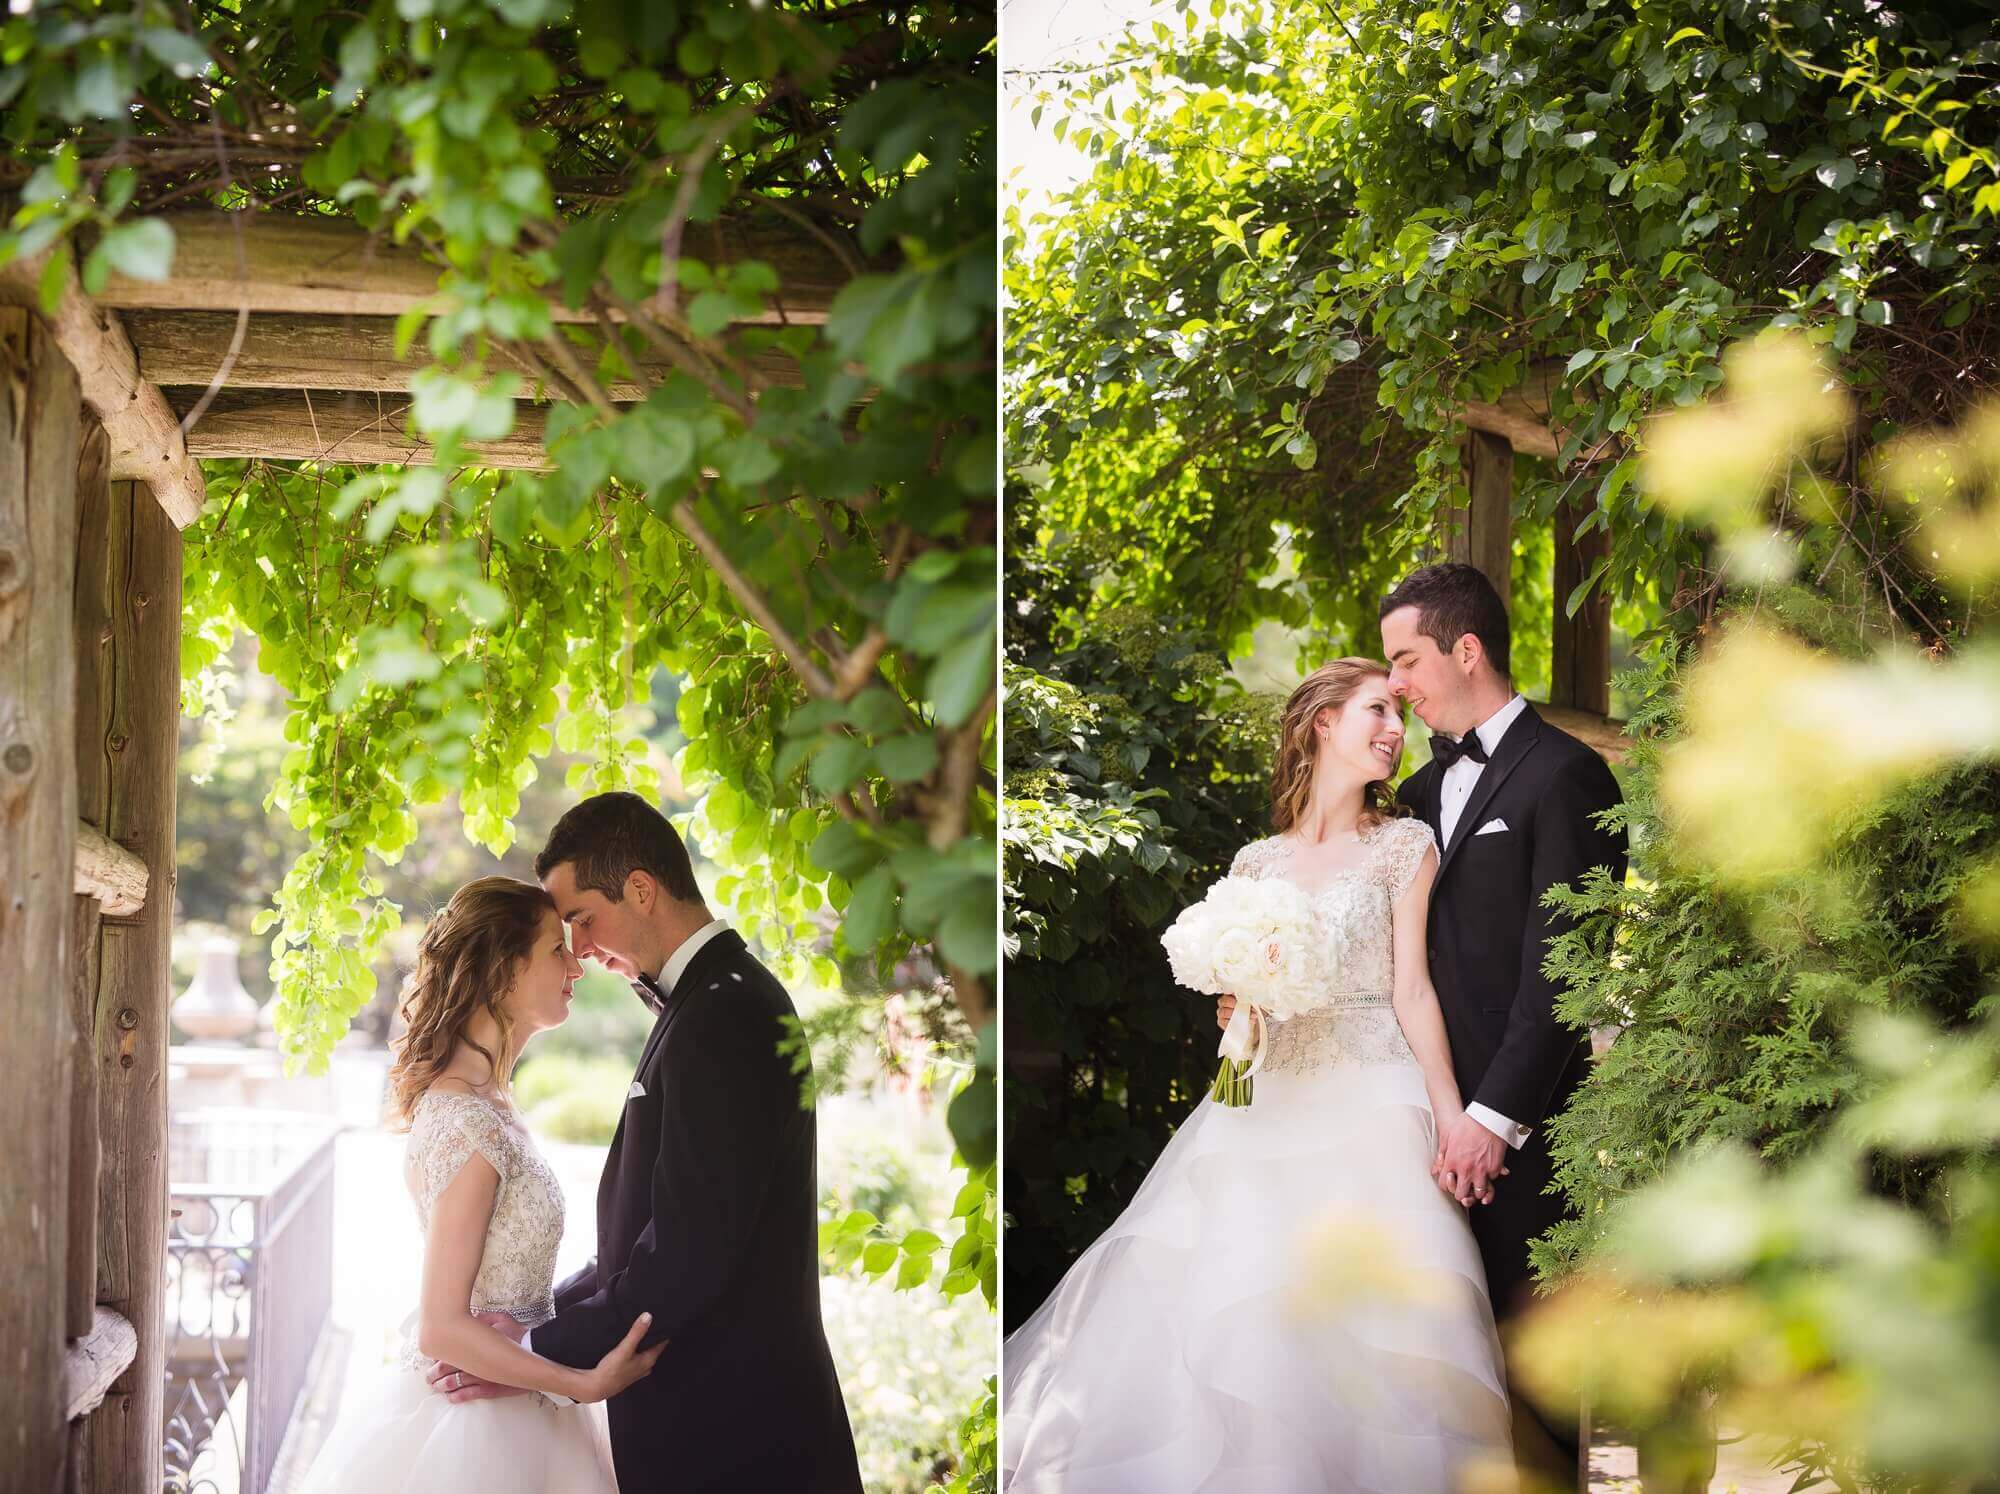 Portraits of the Bride and Groom under a vine archway at Alexander Muir Gardens in Toronto